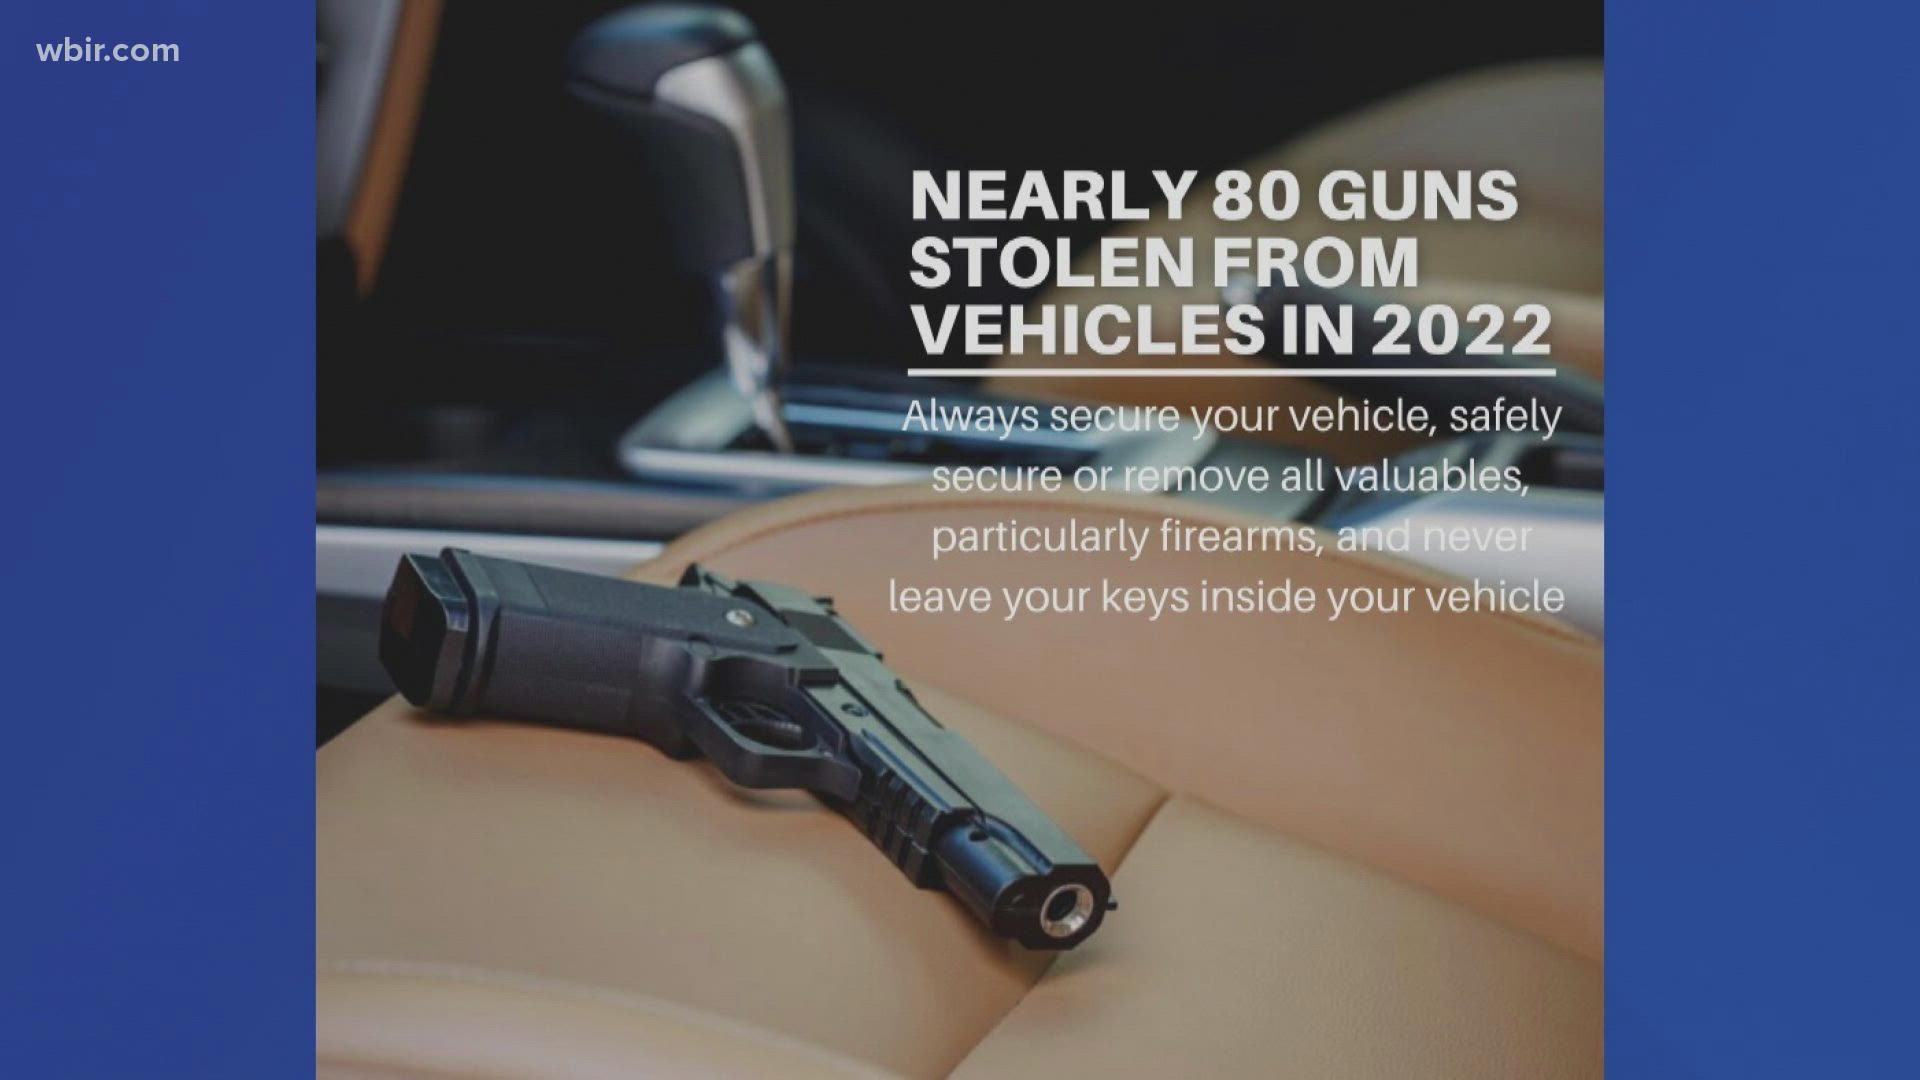 In 2021, there were 123 car burglaries where a firearm was stolen. Cars were left unlocked in over 50% of those cases.